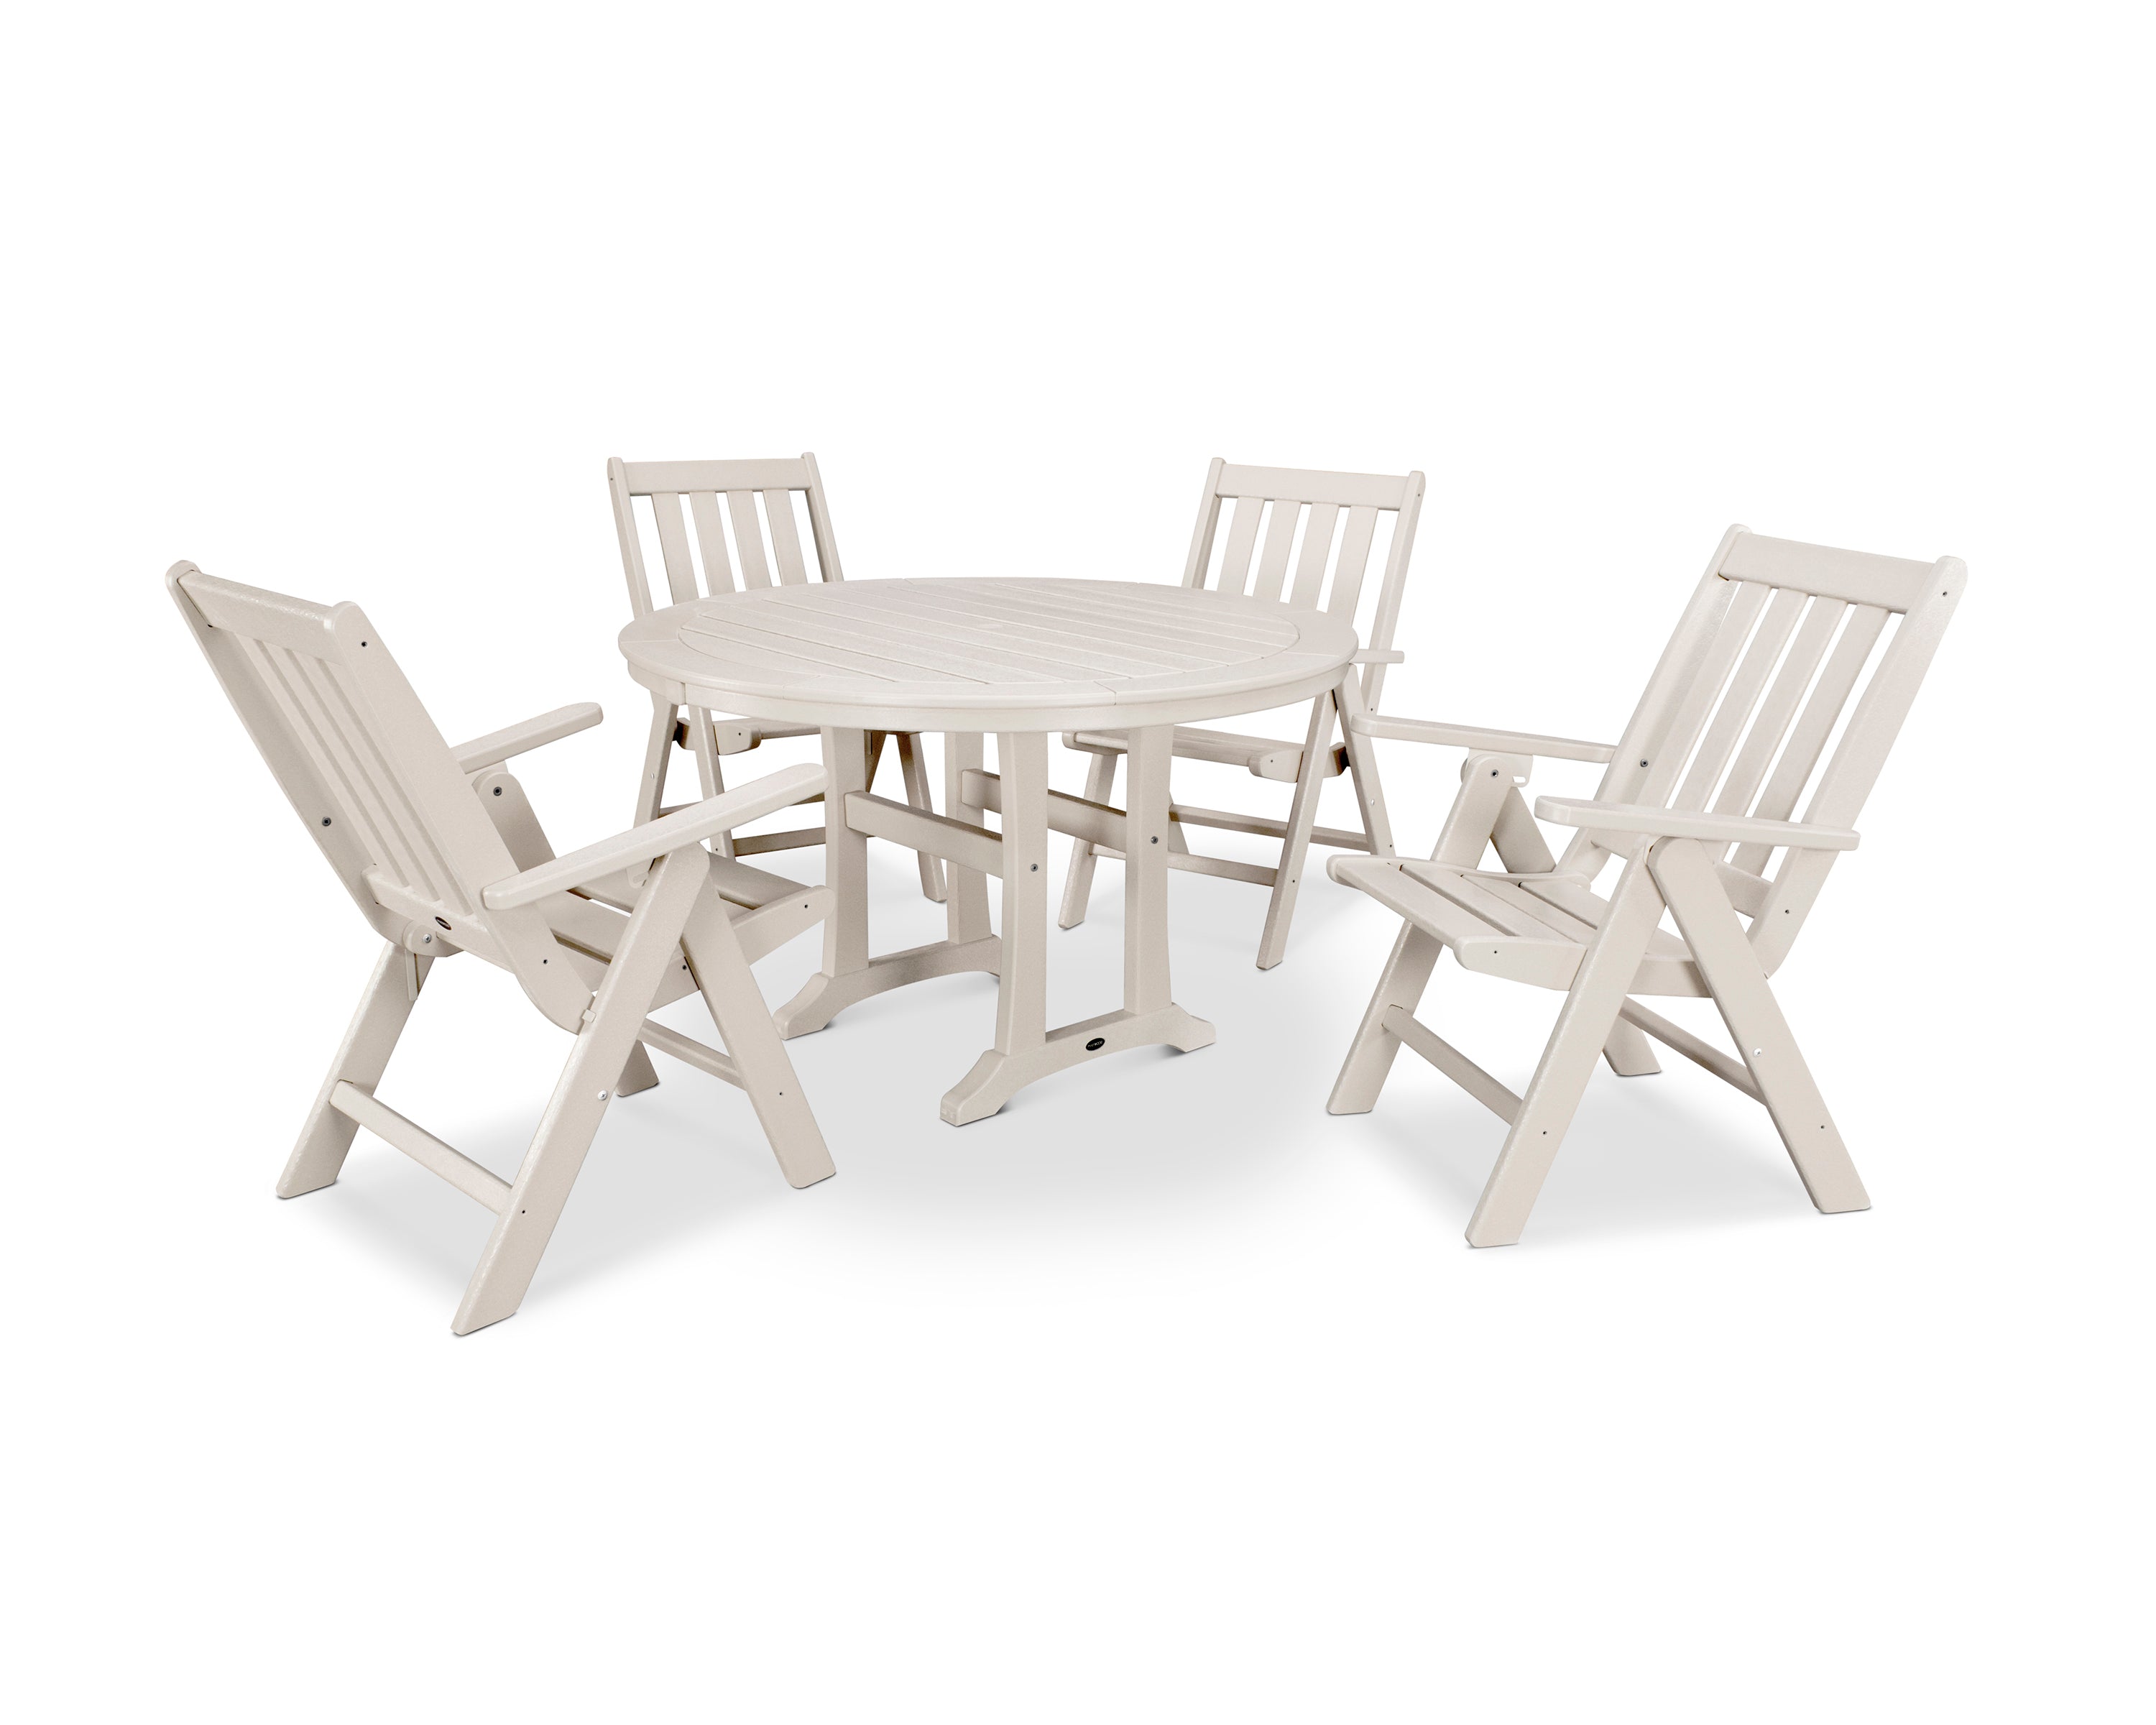 POLYWOOD® Vineyard Folding Chair 5-Piece Round Dining Set with Trestle Legs in Sand